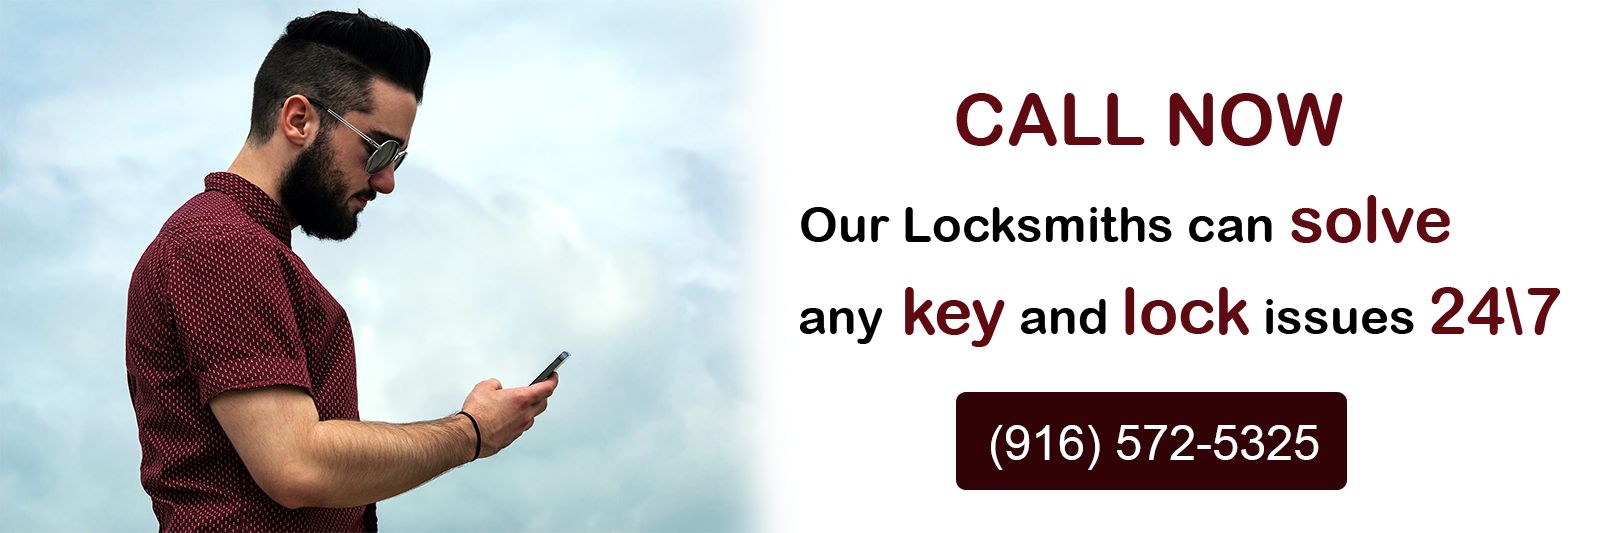 Call To The Best 24 Hour Locksmith